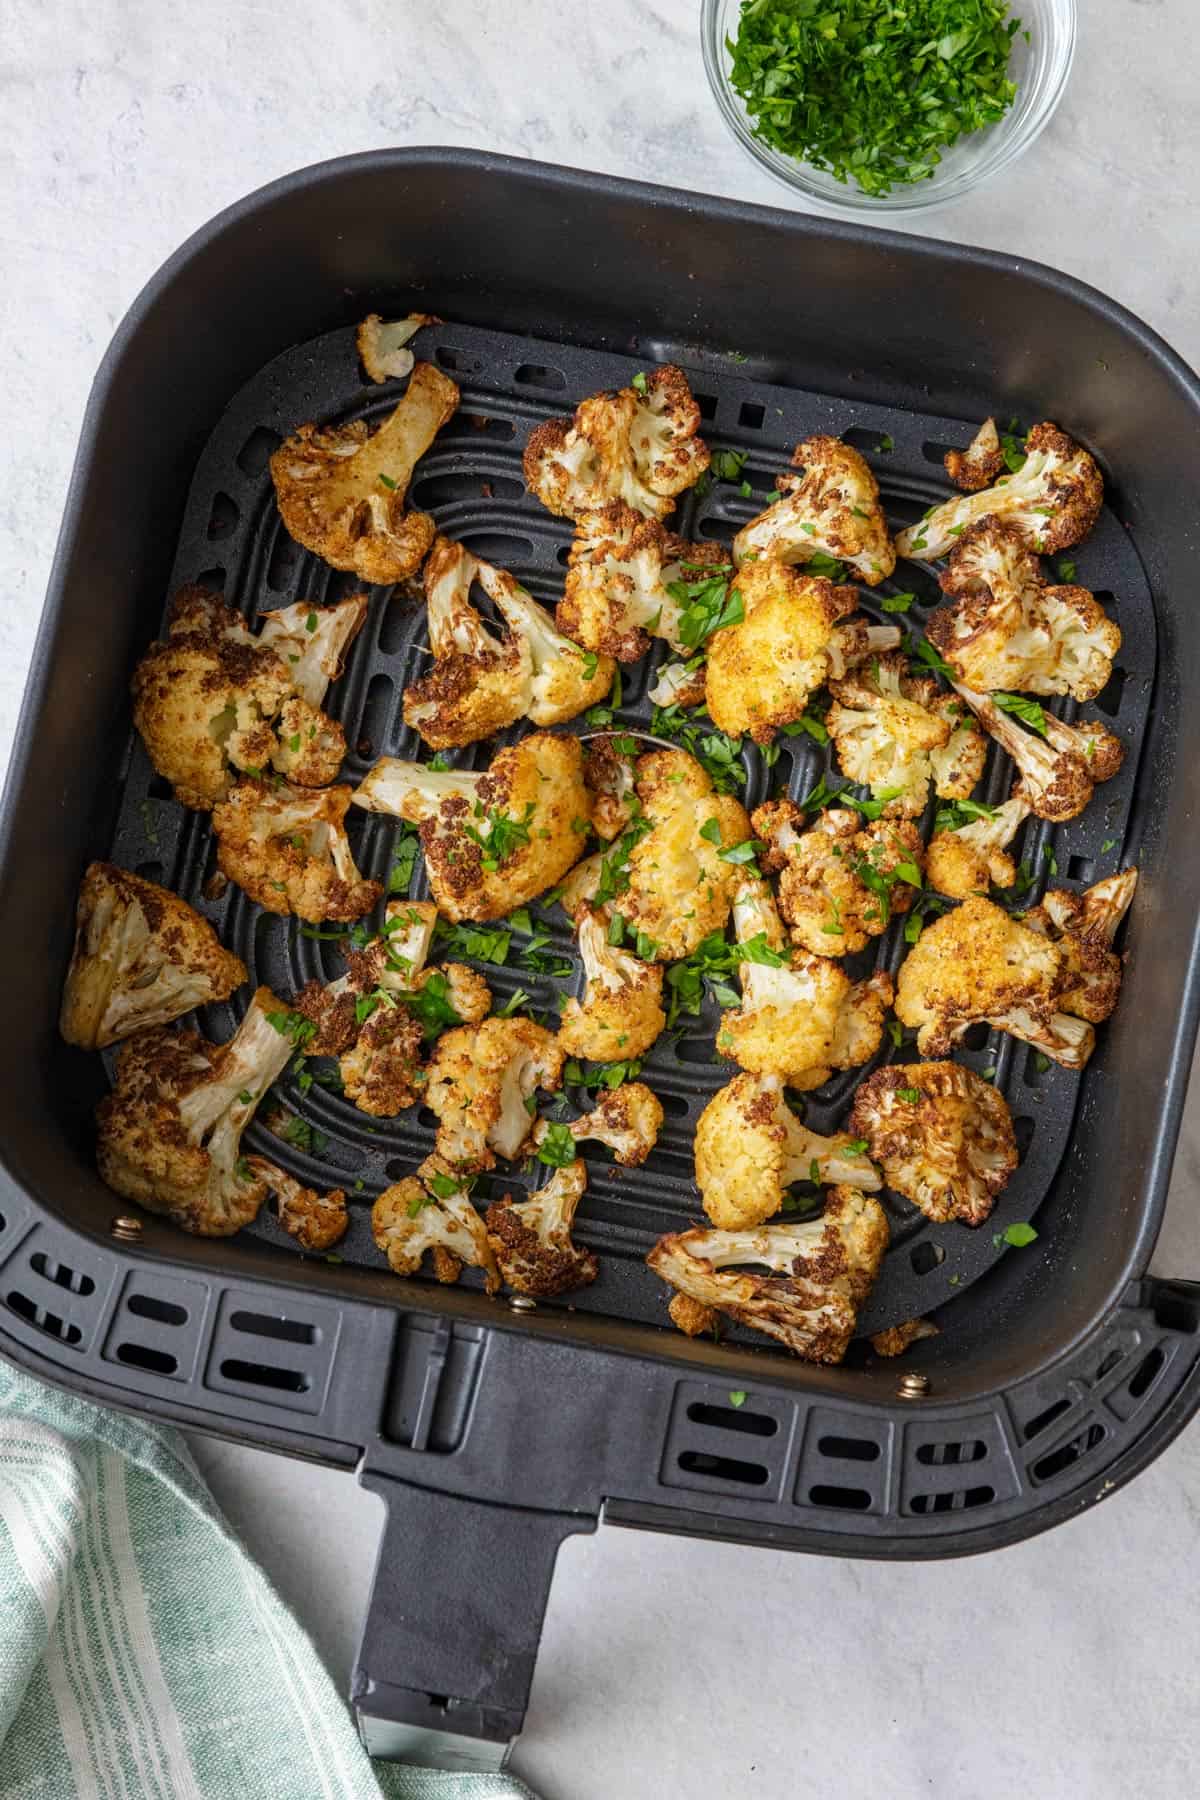 How Long To Cook Cauliflower In Air Fryer